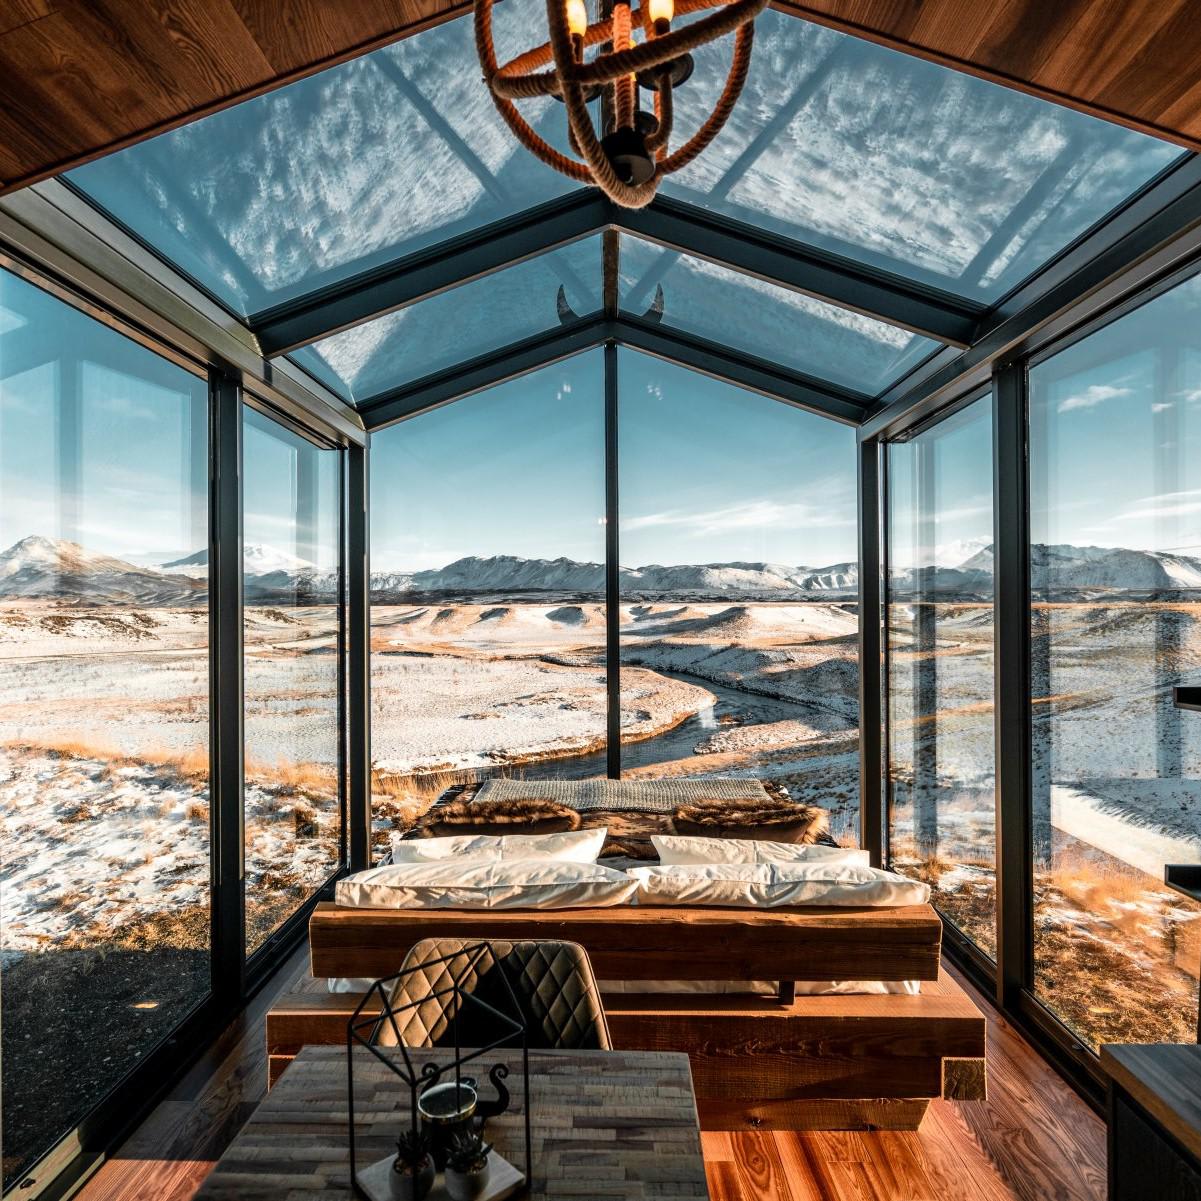 Bedroom inside a glass cabin with panoramic views of Iceland countryside, by ÖÖD (Photo: Panorama Glass Lodge)